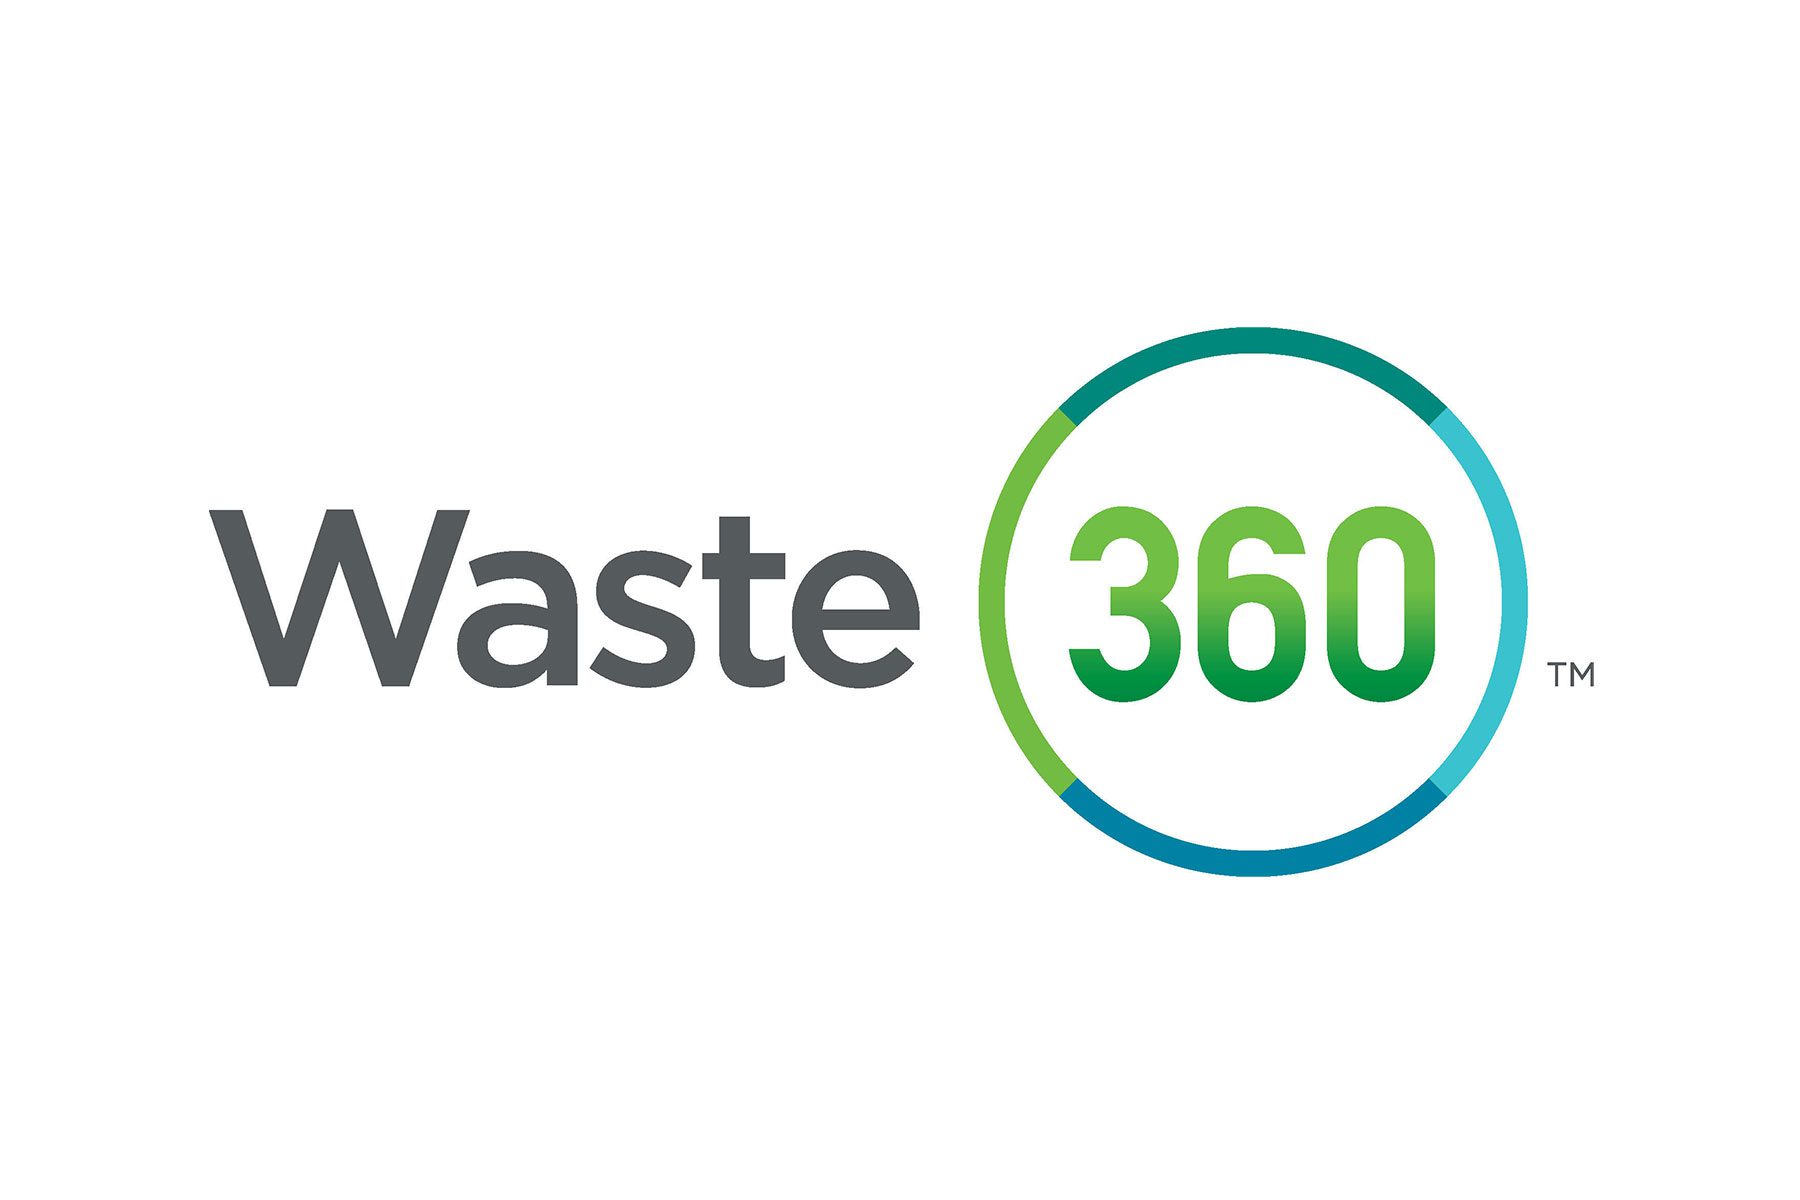 RBN Insurance Services Waste360 - Insuring Waste, Recycling Operations is Risky, Especially During a Pandemic RBN WASTE360 LOGO